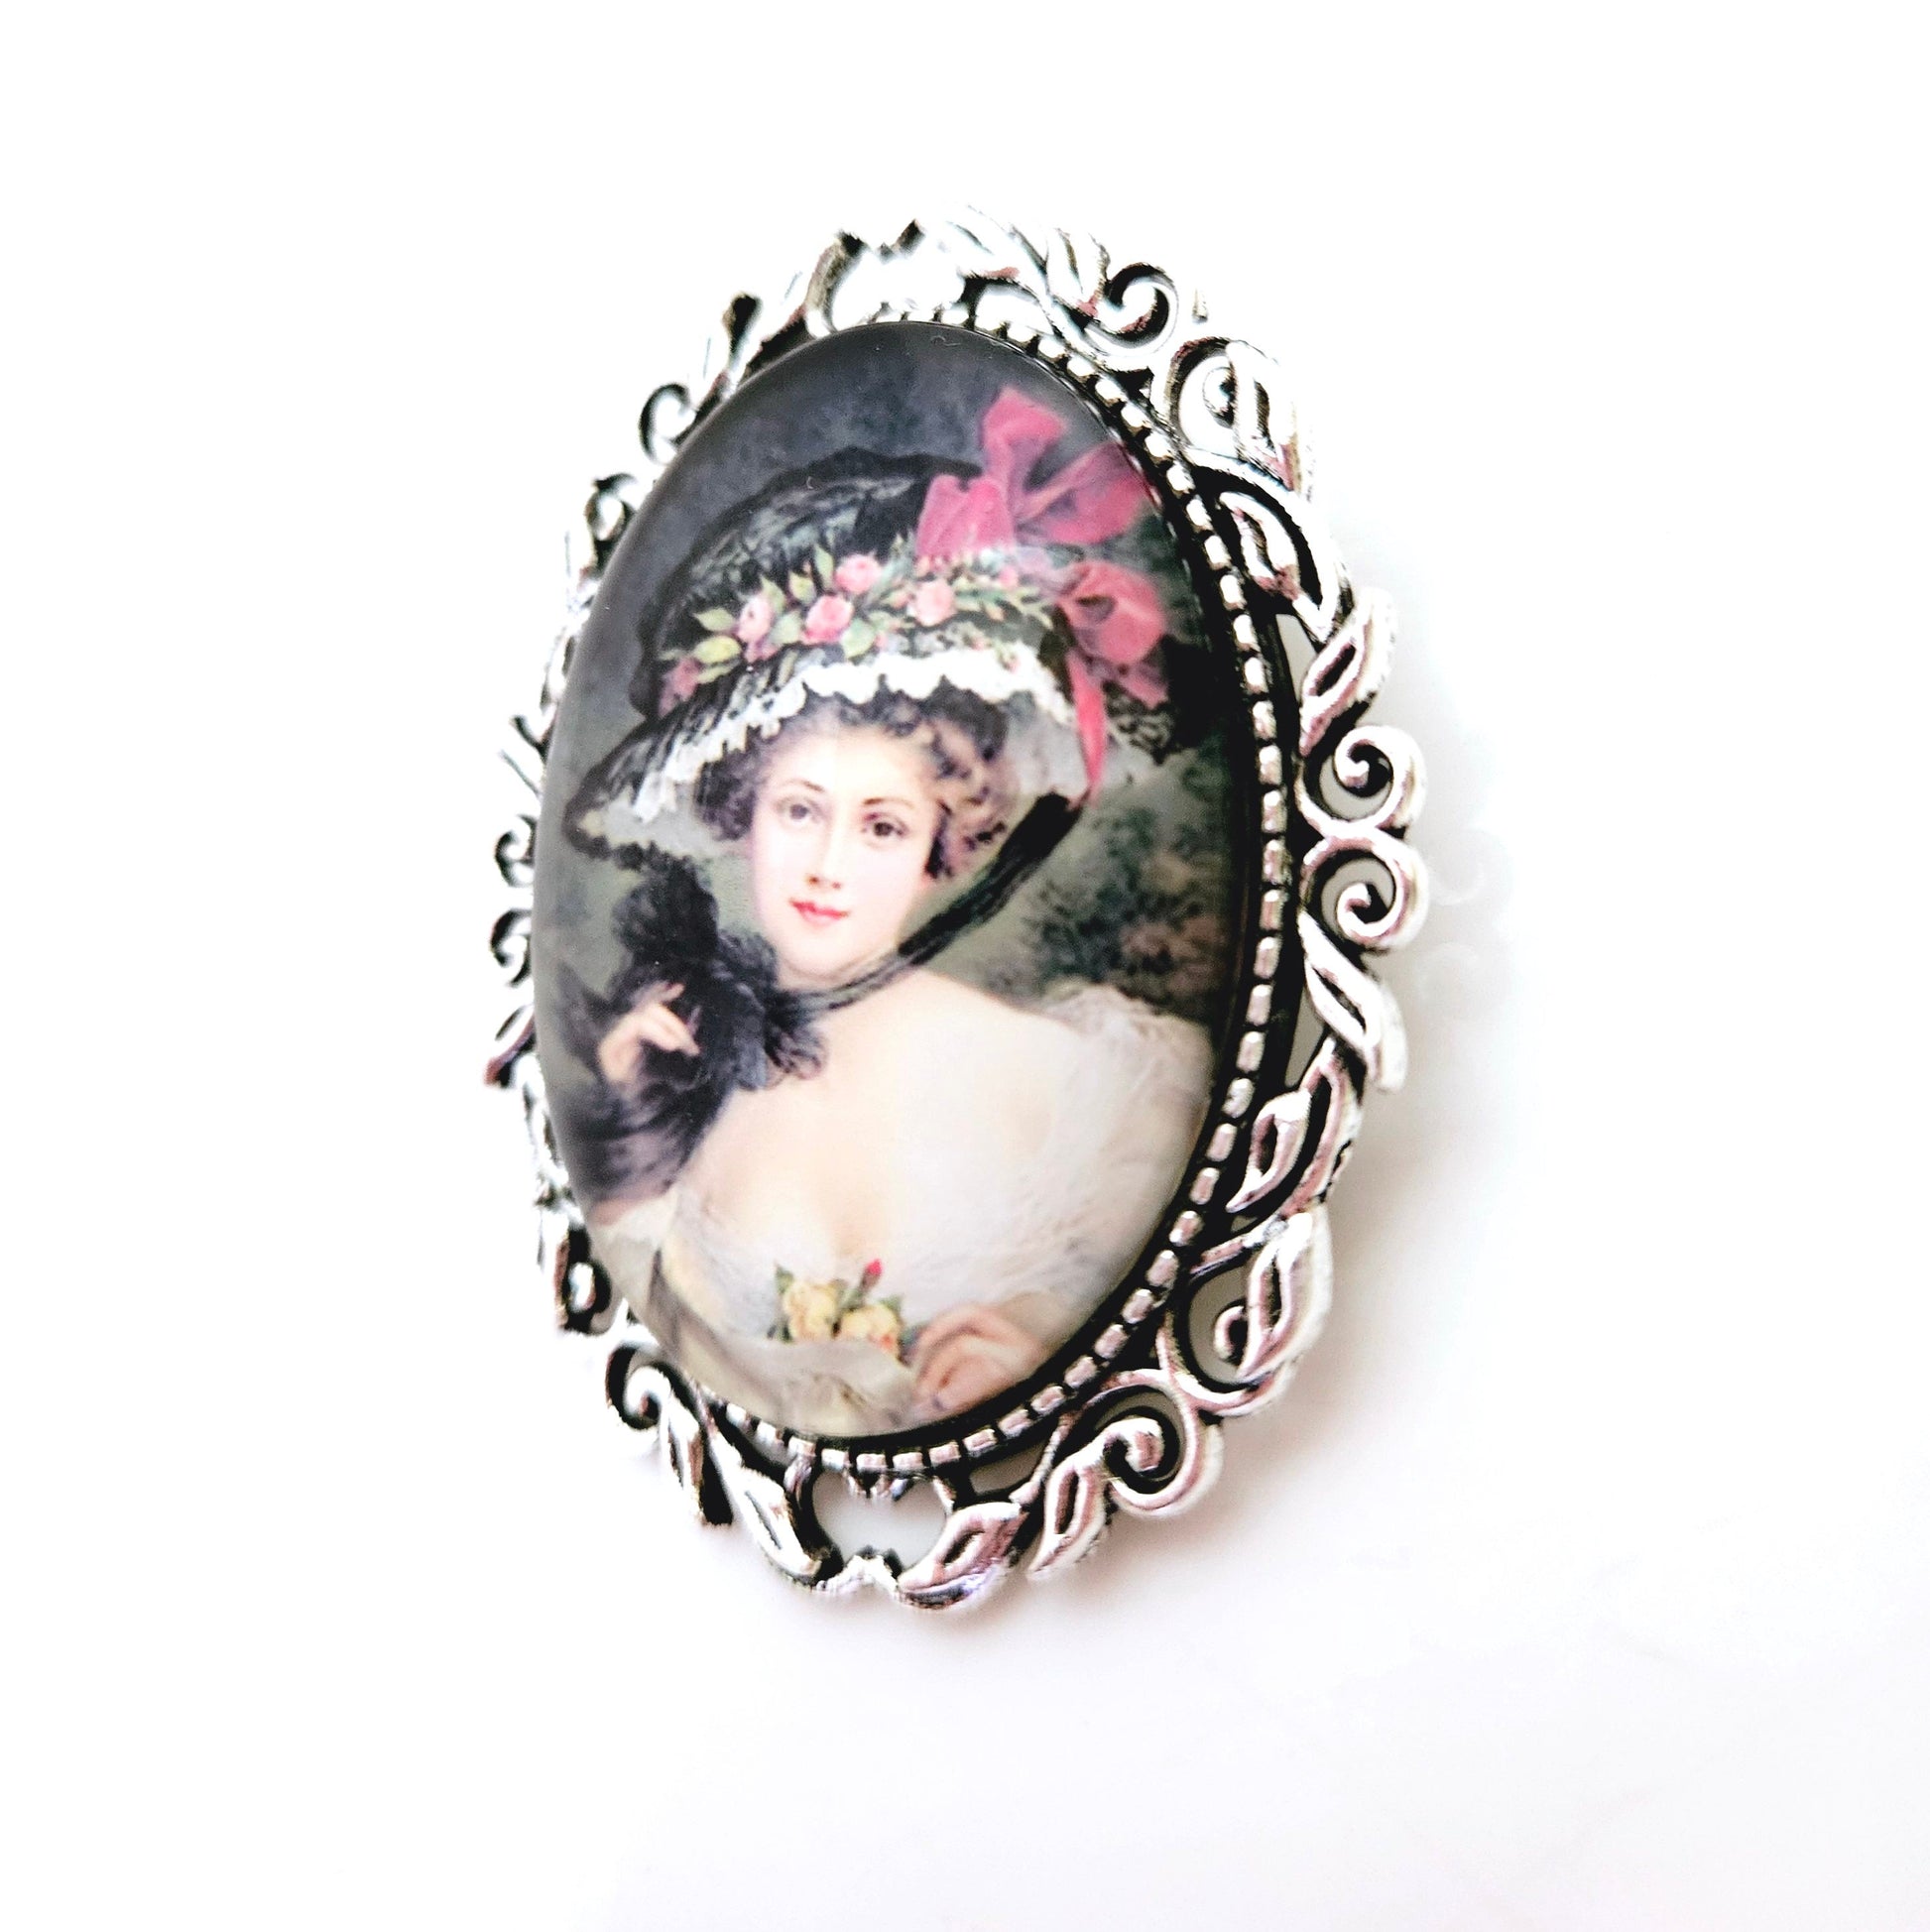 Vintage Style Cameo Brooch, Victorian Lady Portrait Brooch, Silver Plated, Lady with Flower Hat, Stylish Cameo Pin, Brooches For Women